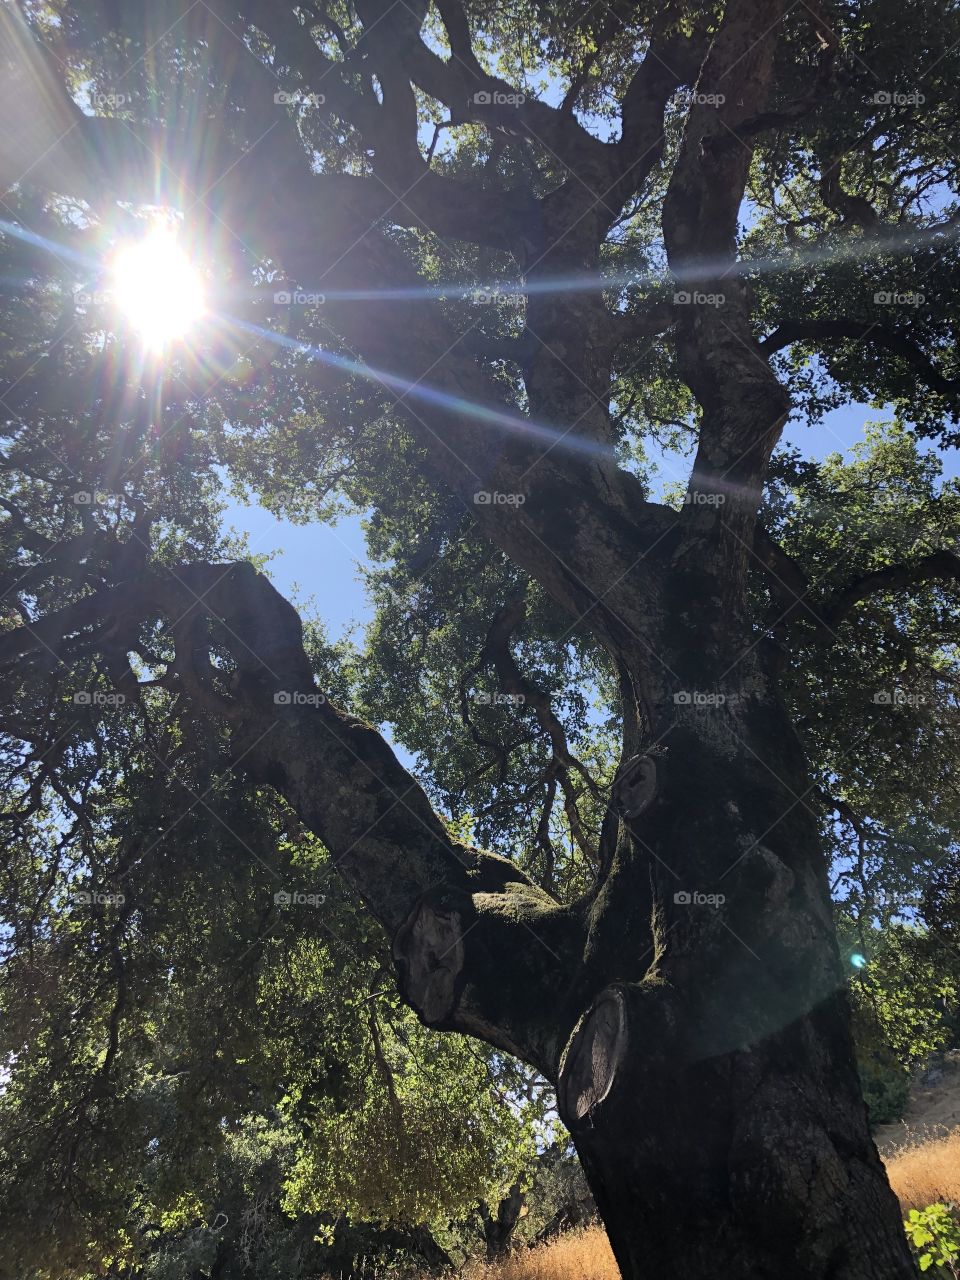 Tree with branches and leaves facing upwards and the sun reflecting above in the clear sky